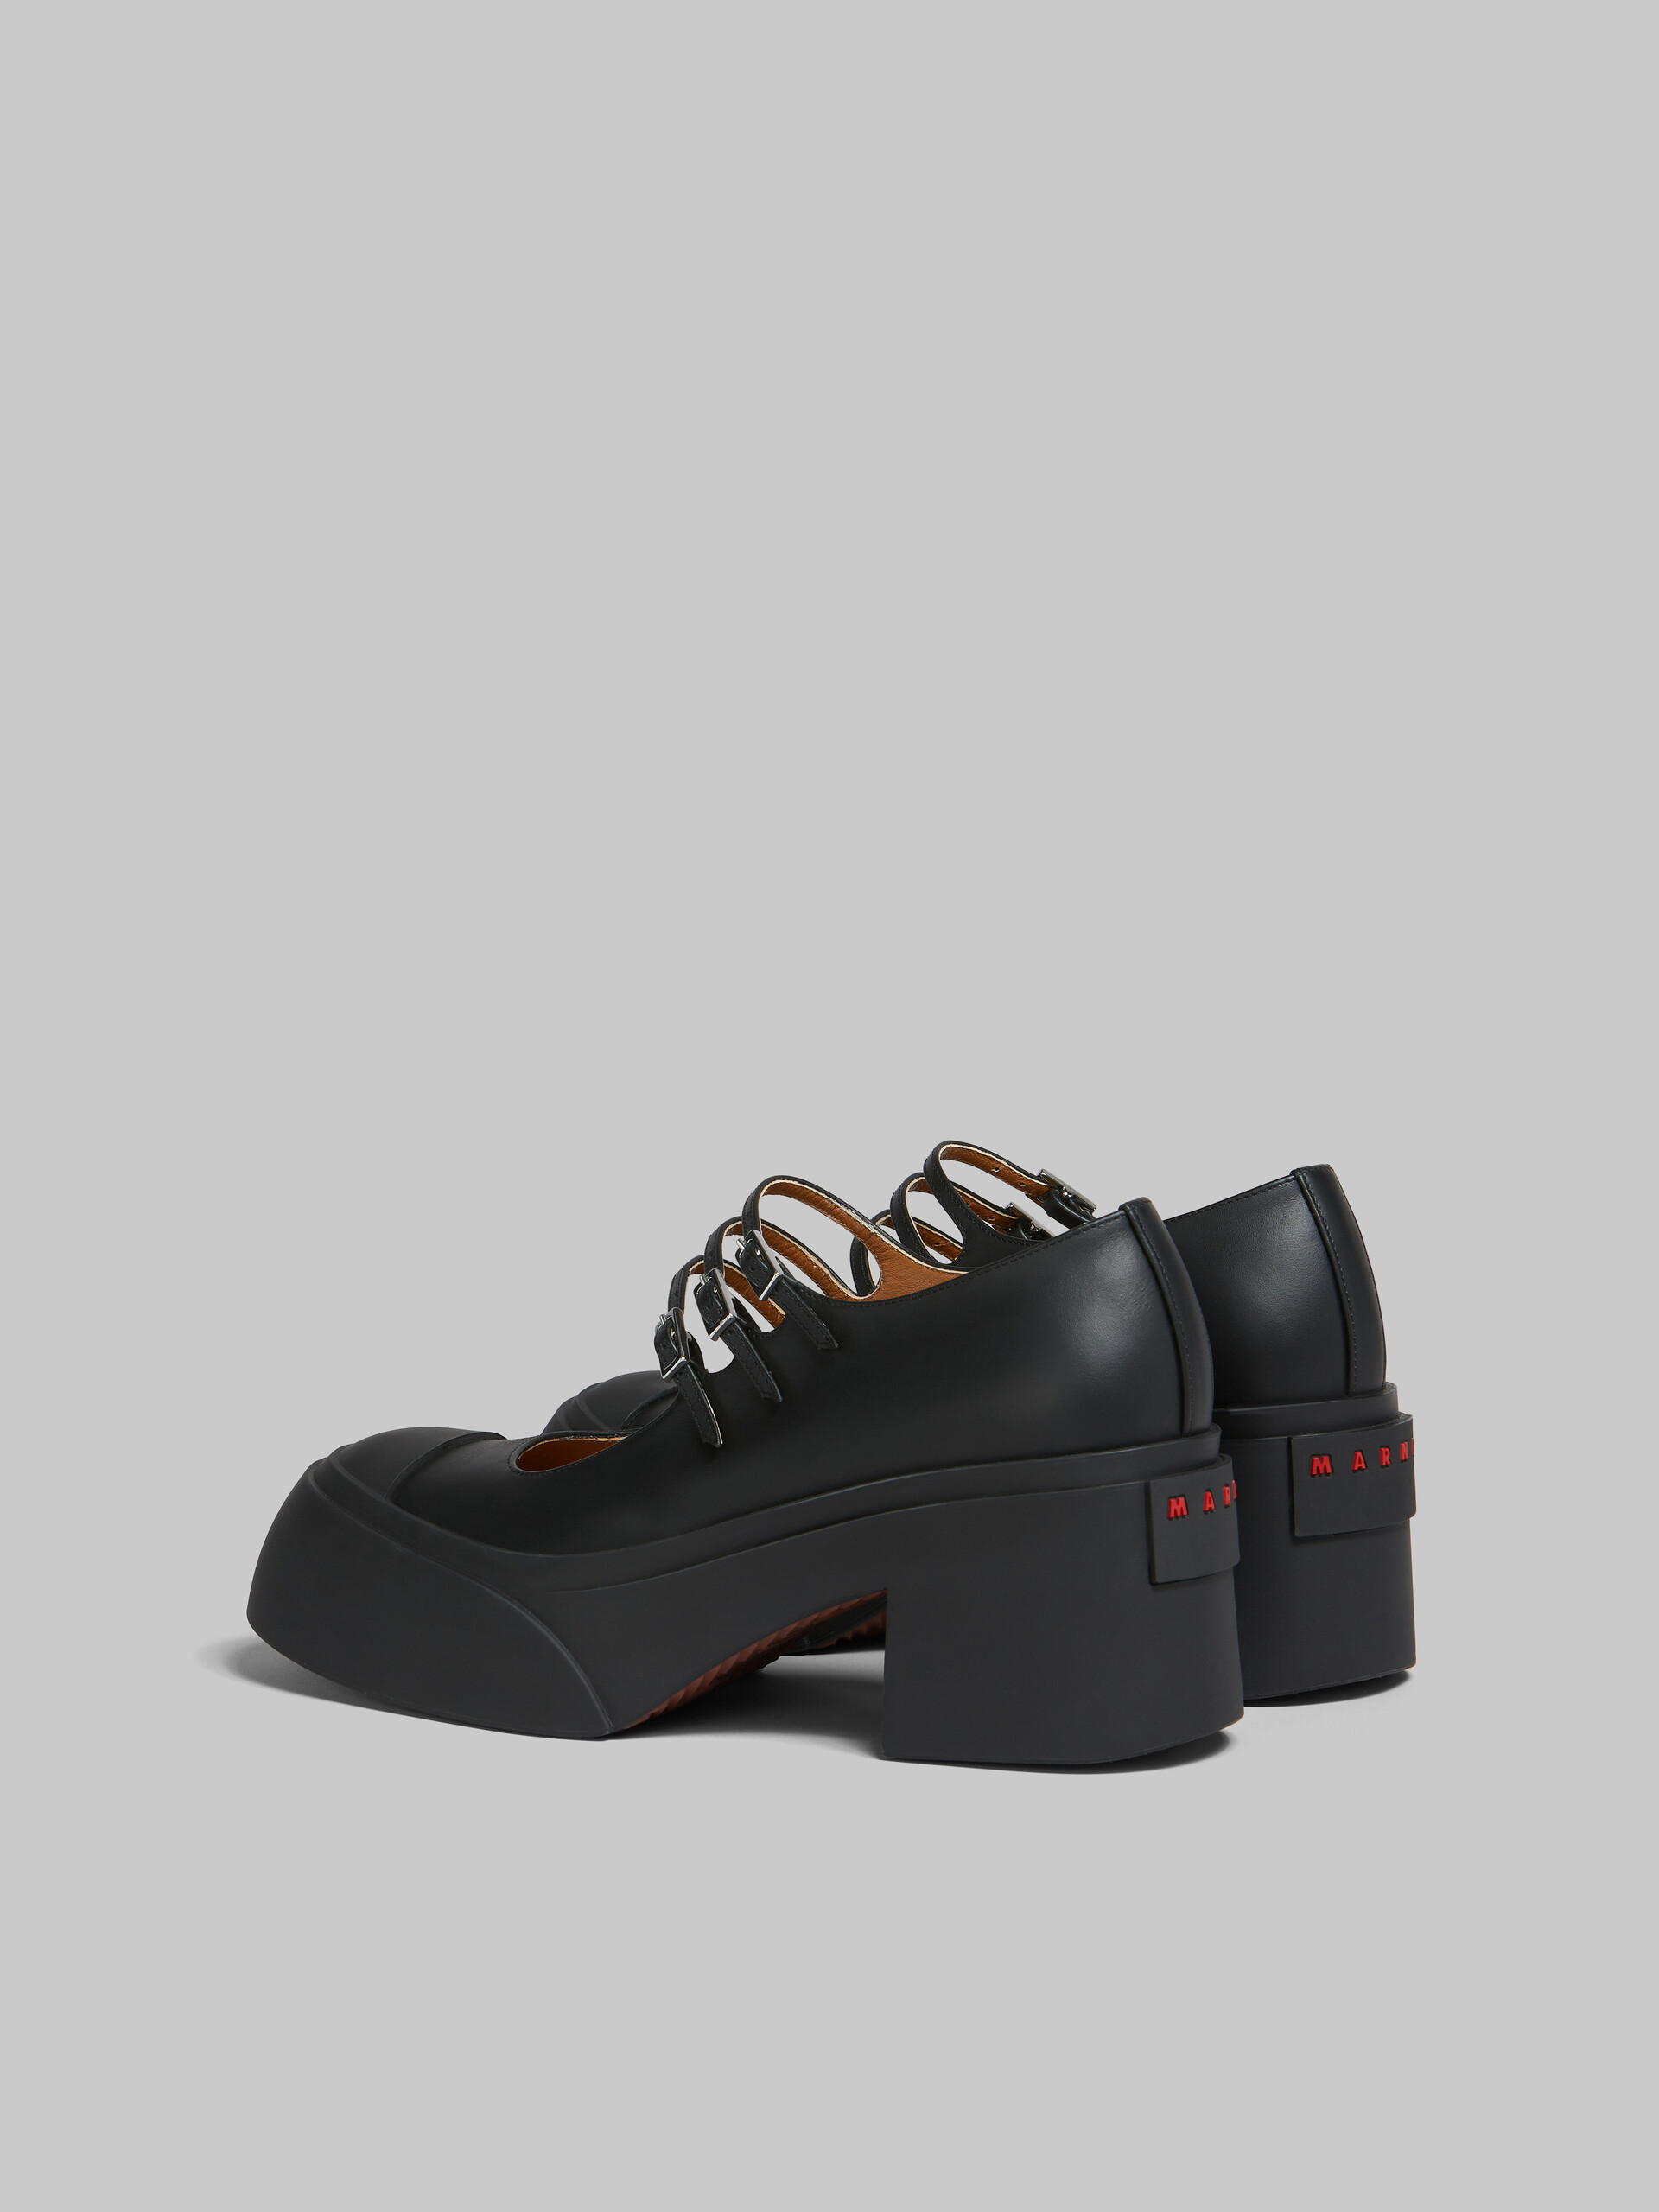 Black leather Pablo triple-buckle Mary Jane shoe - Sneakers - Image 3